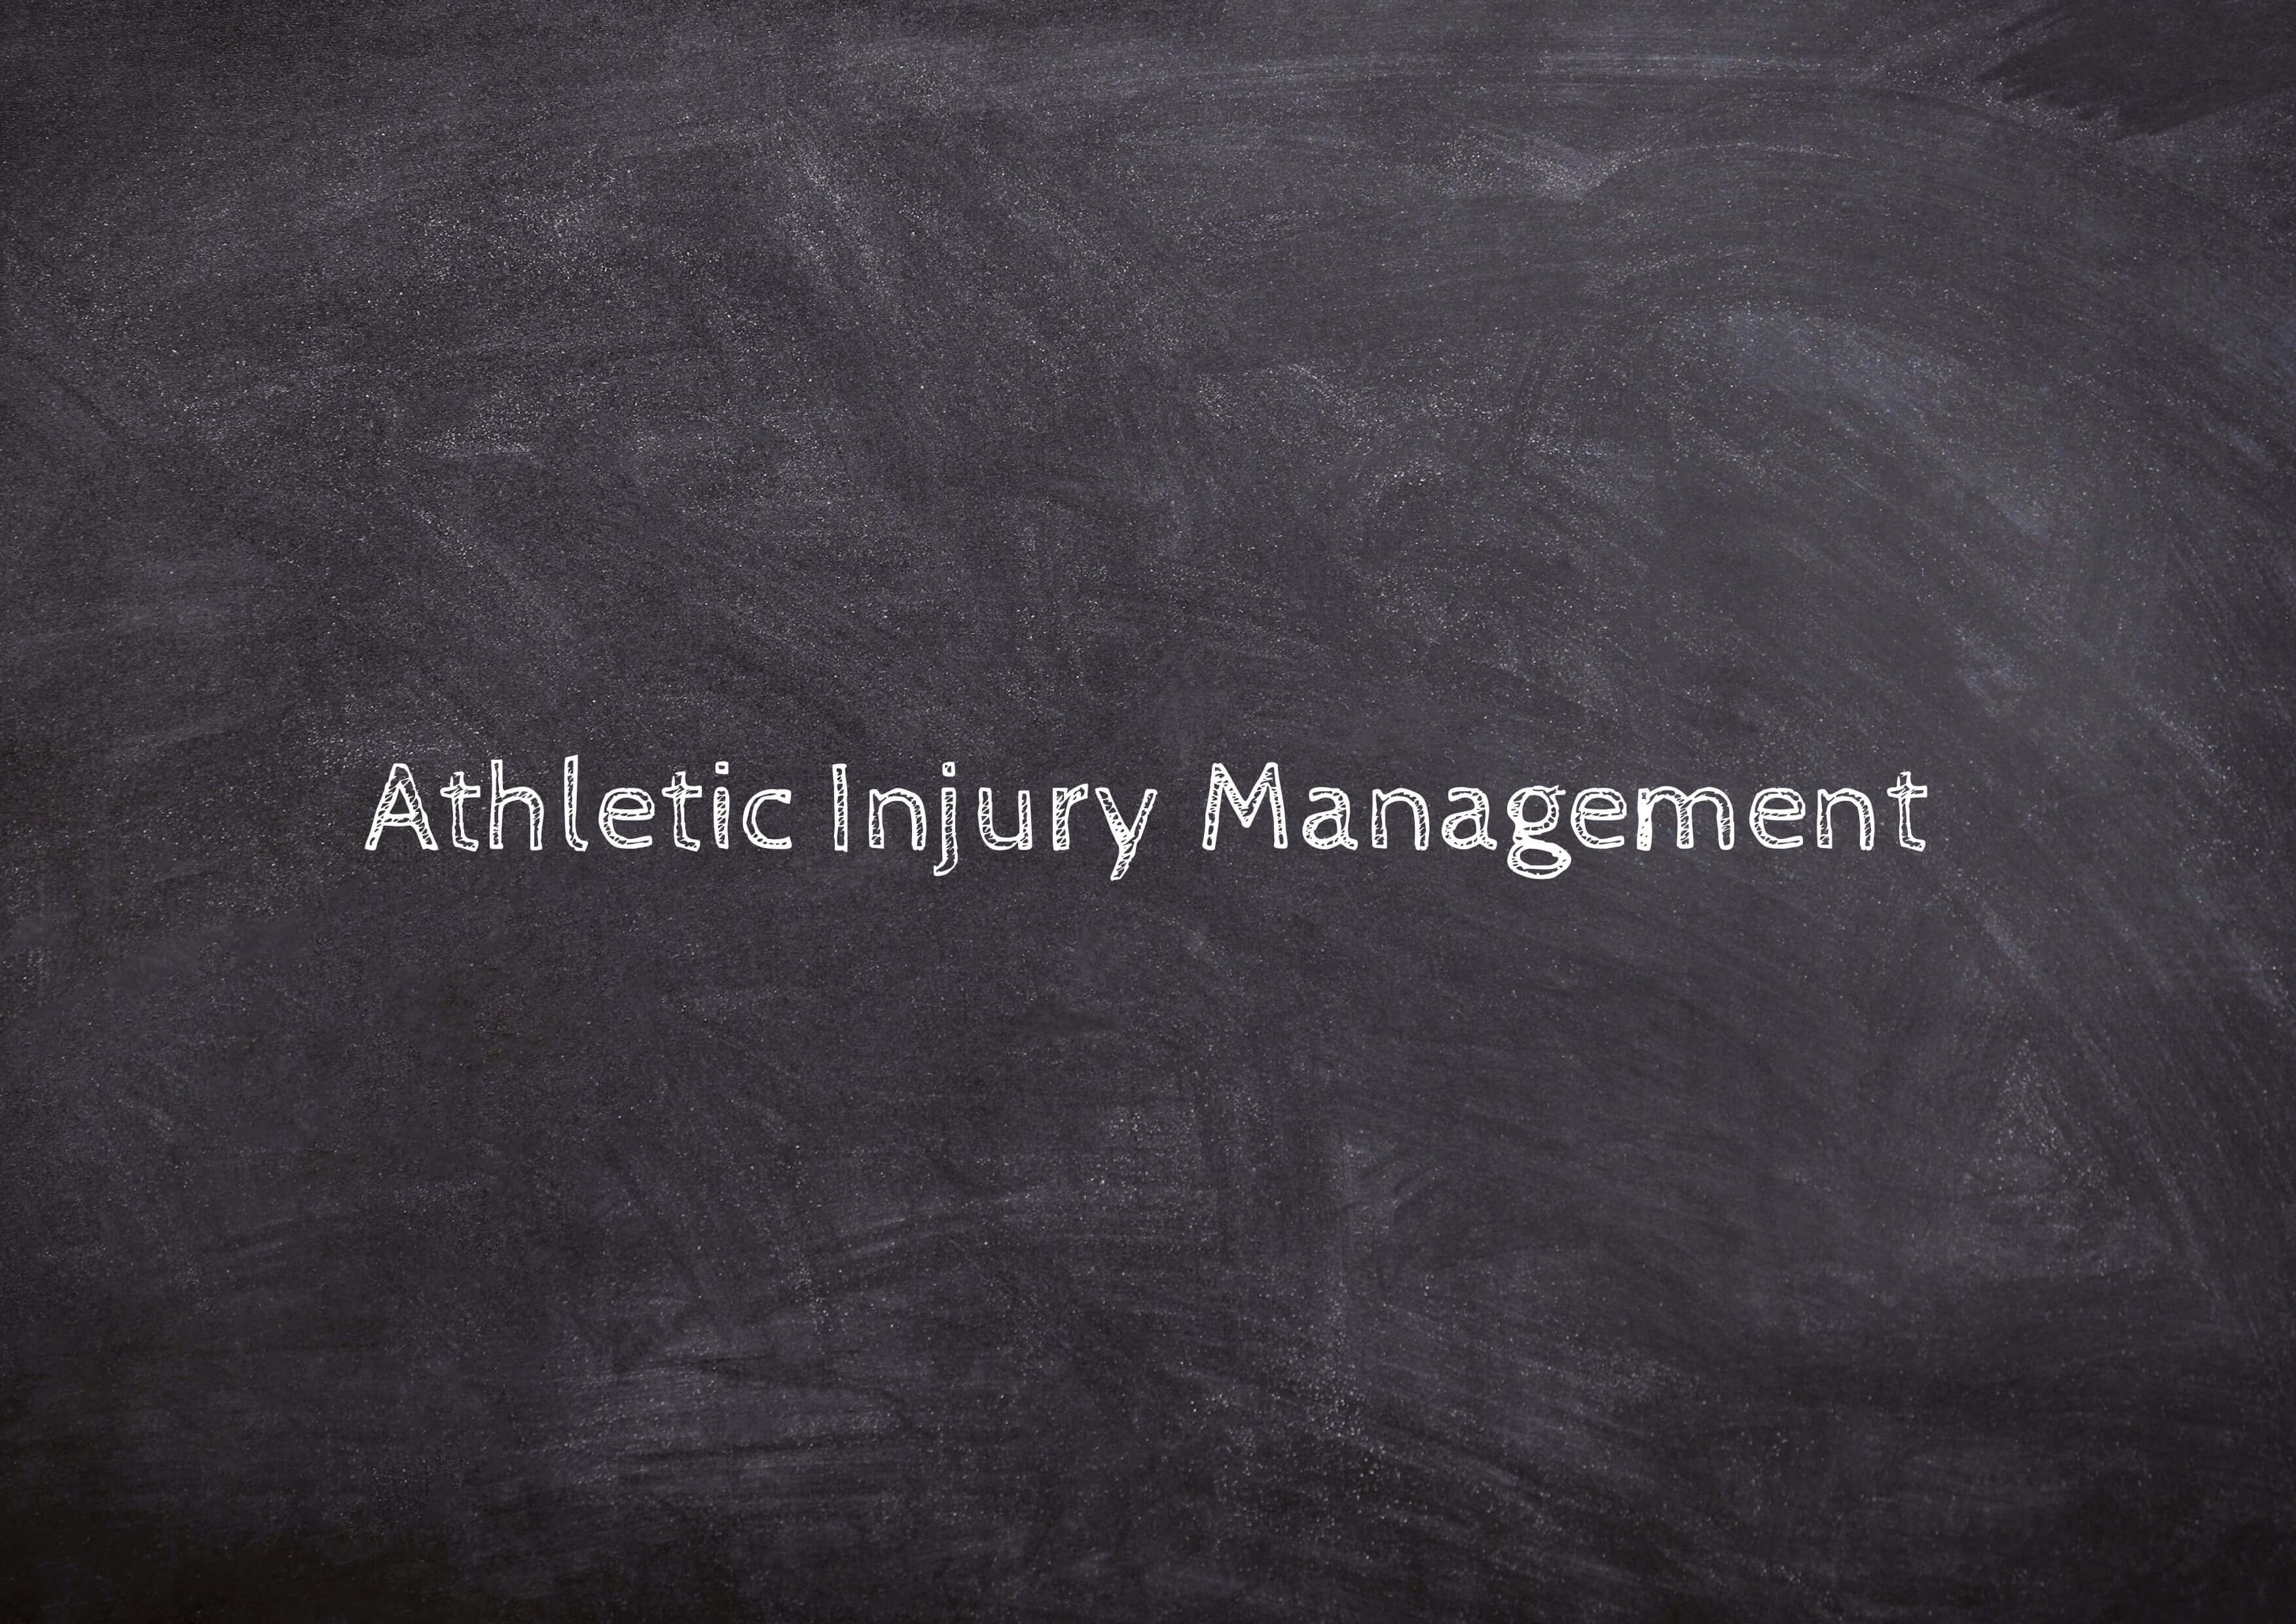 Athletic Injury Management text on chalk board